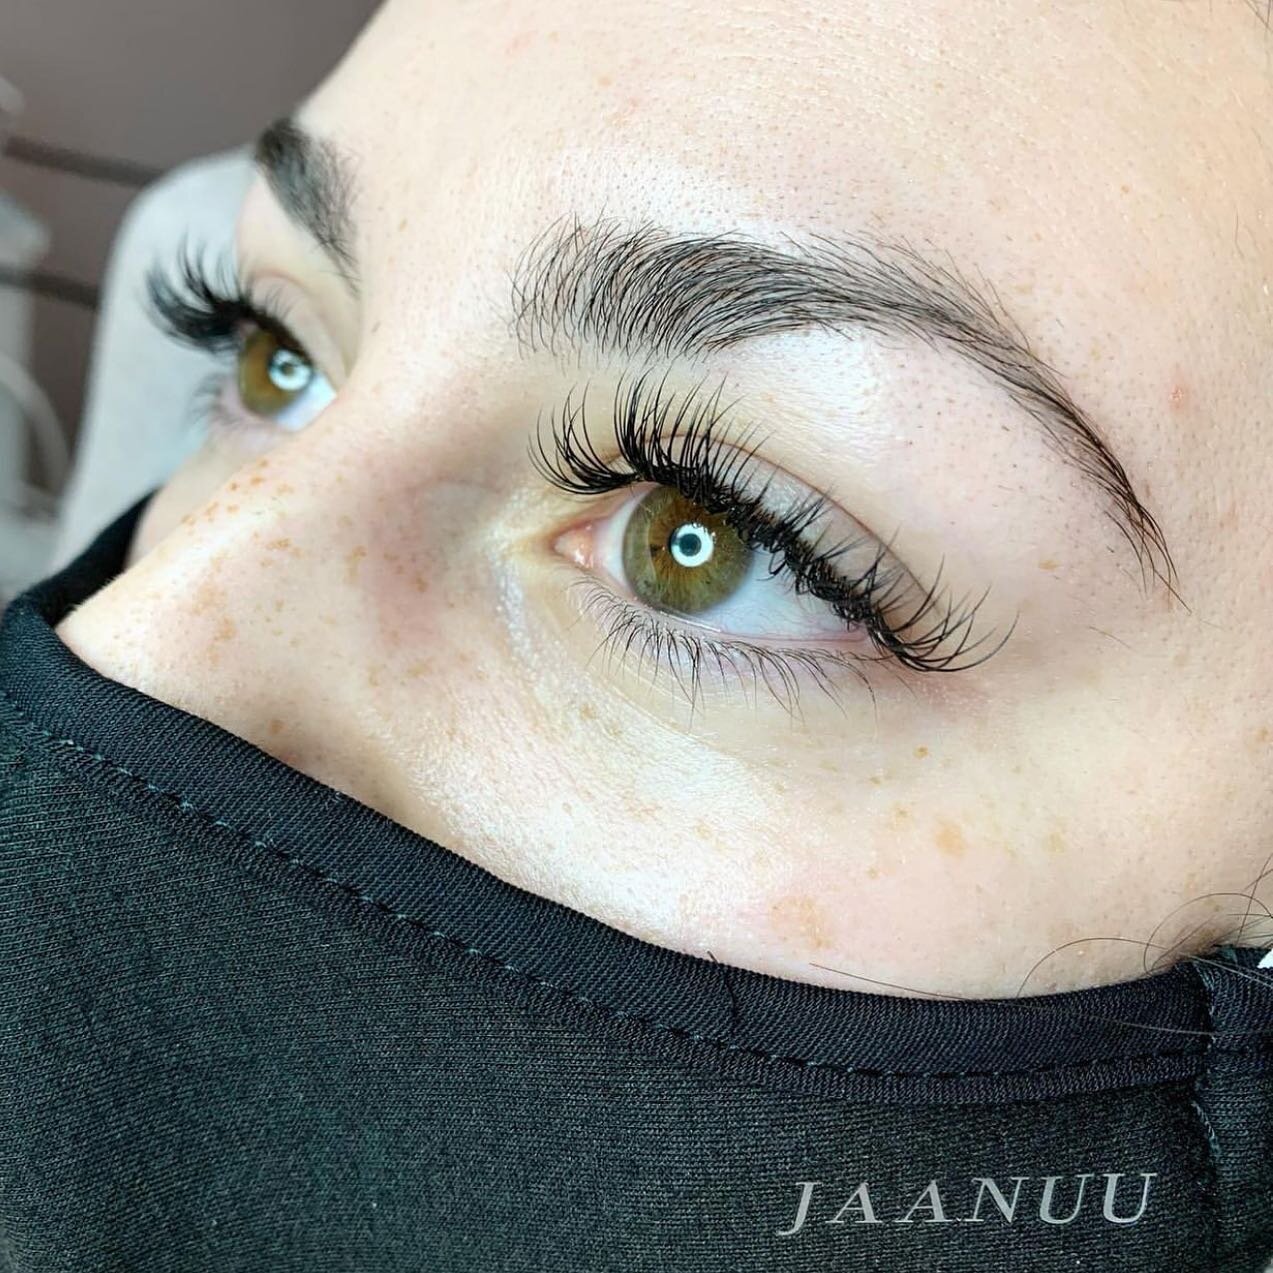 Throwback Thursday to this amazing set👀😍 

We can&rsquo;t get enough of lashes lately! Our lash tech @magdawysz_beauty is absolutely amazing! Call to book your appointment today at 609-599-9094✨